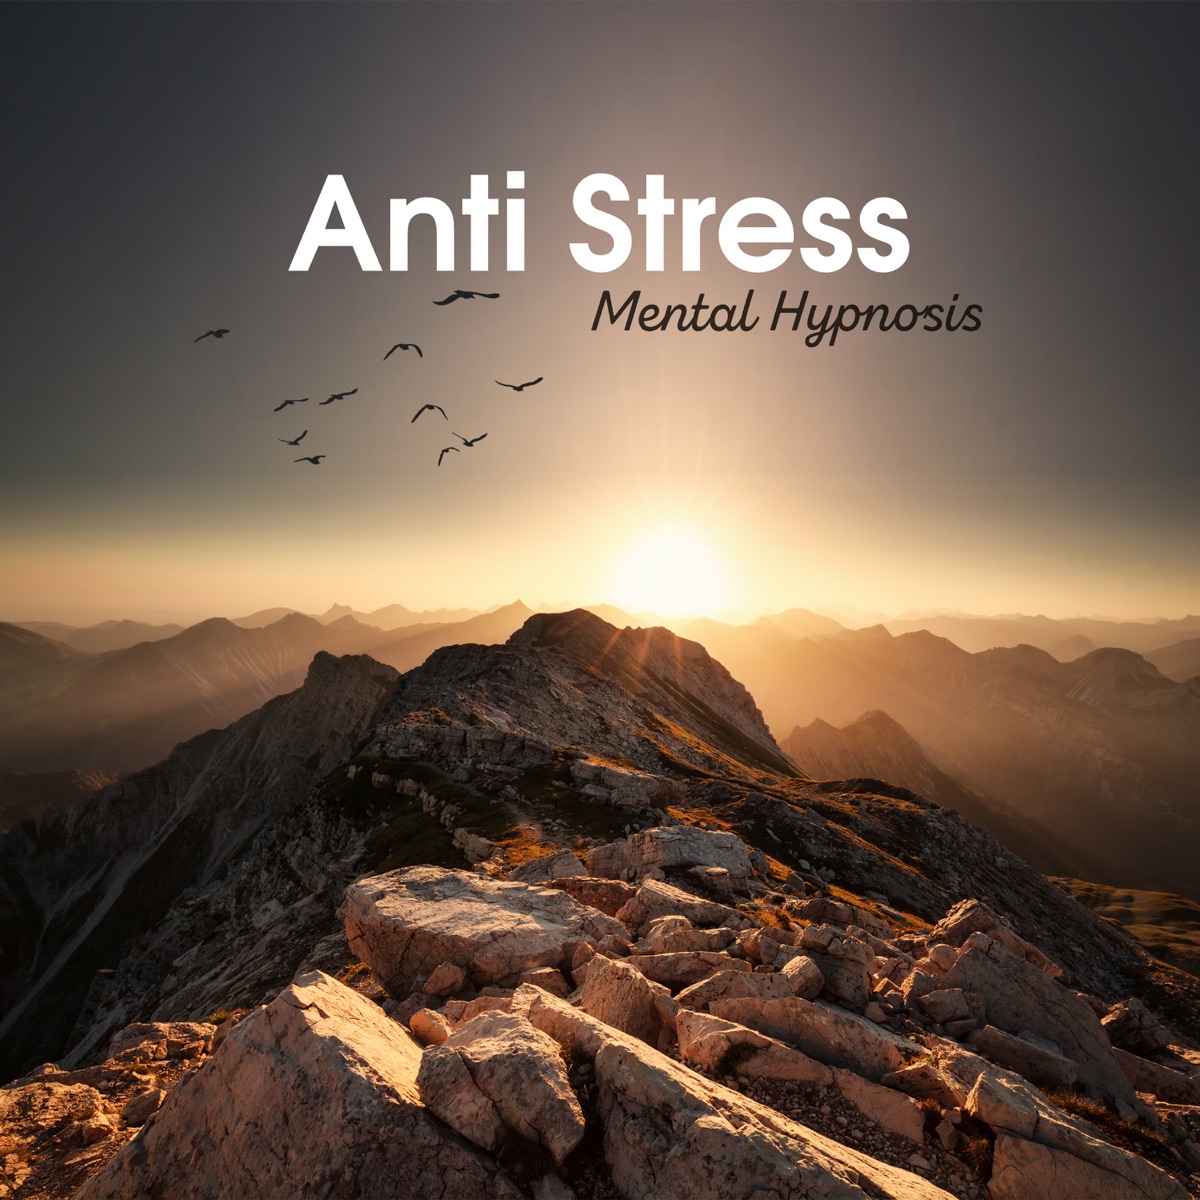 Stress Relief - Apple Music